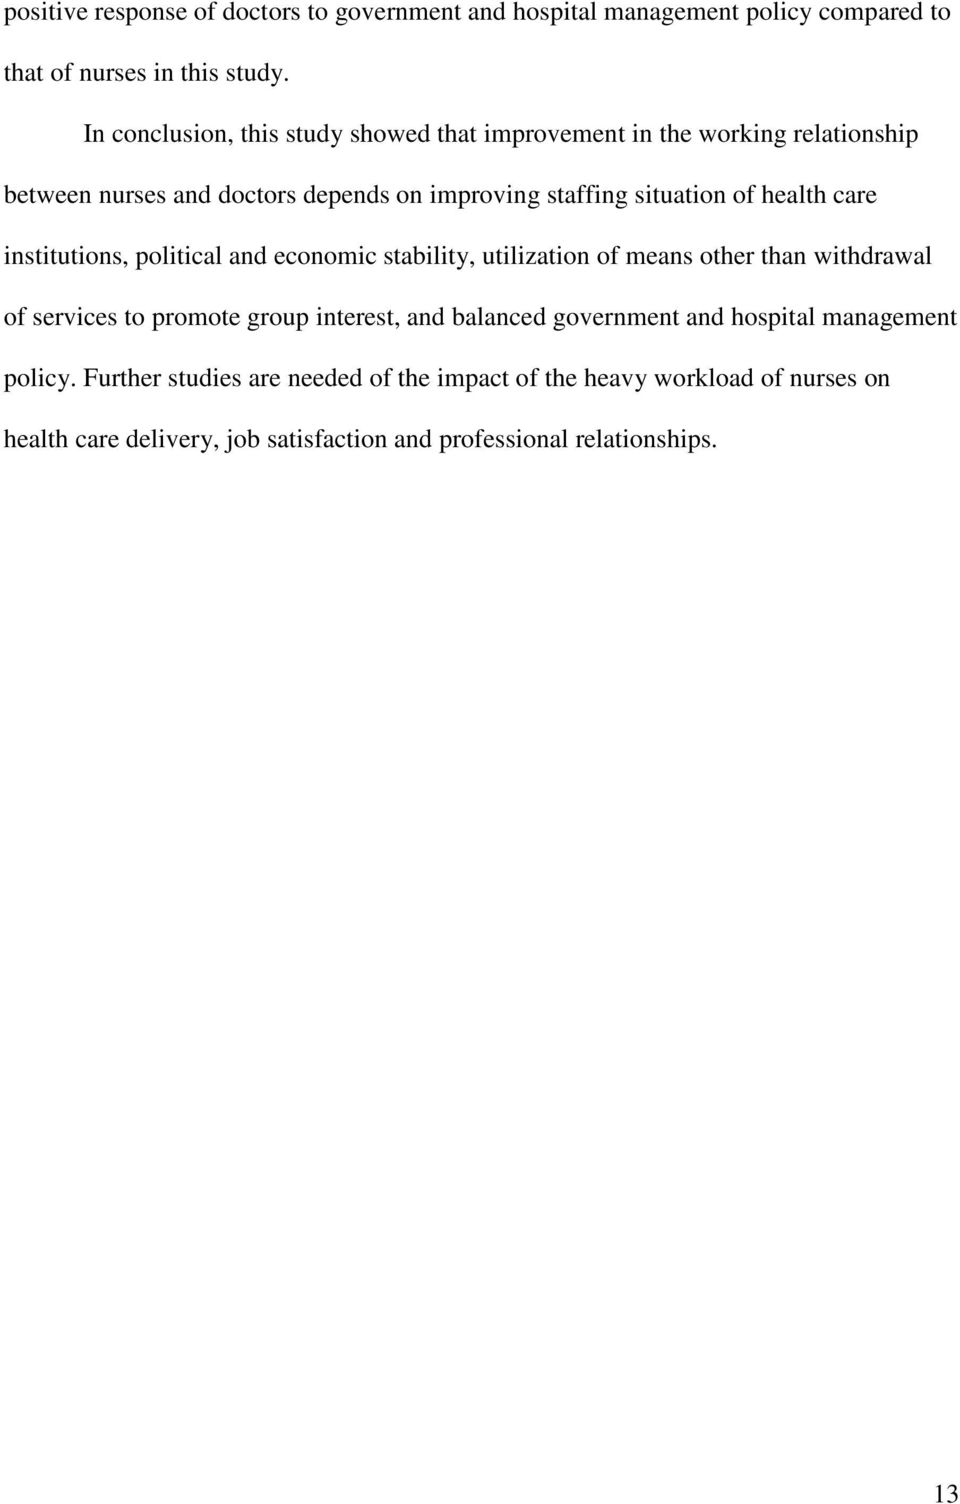 health care institutions, political and economic stability, utilization of means other than withdrawal of services to promote group interest, and